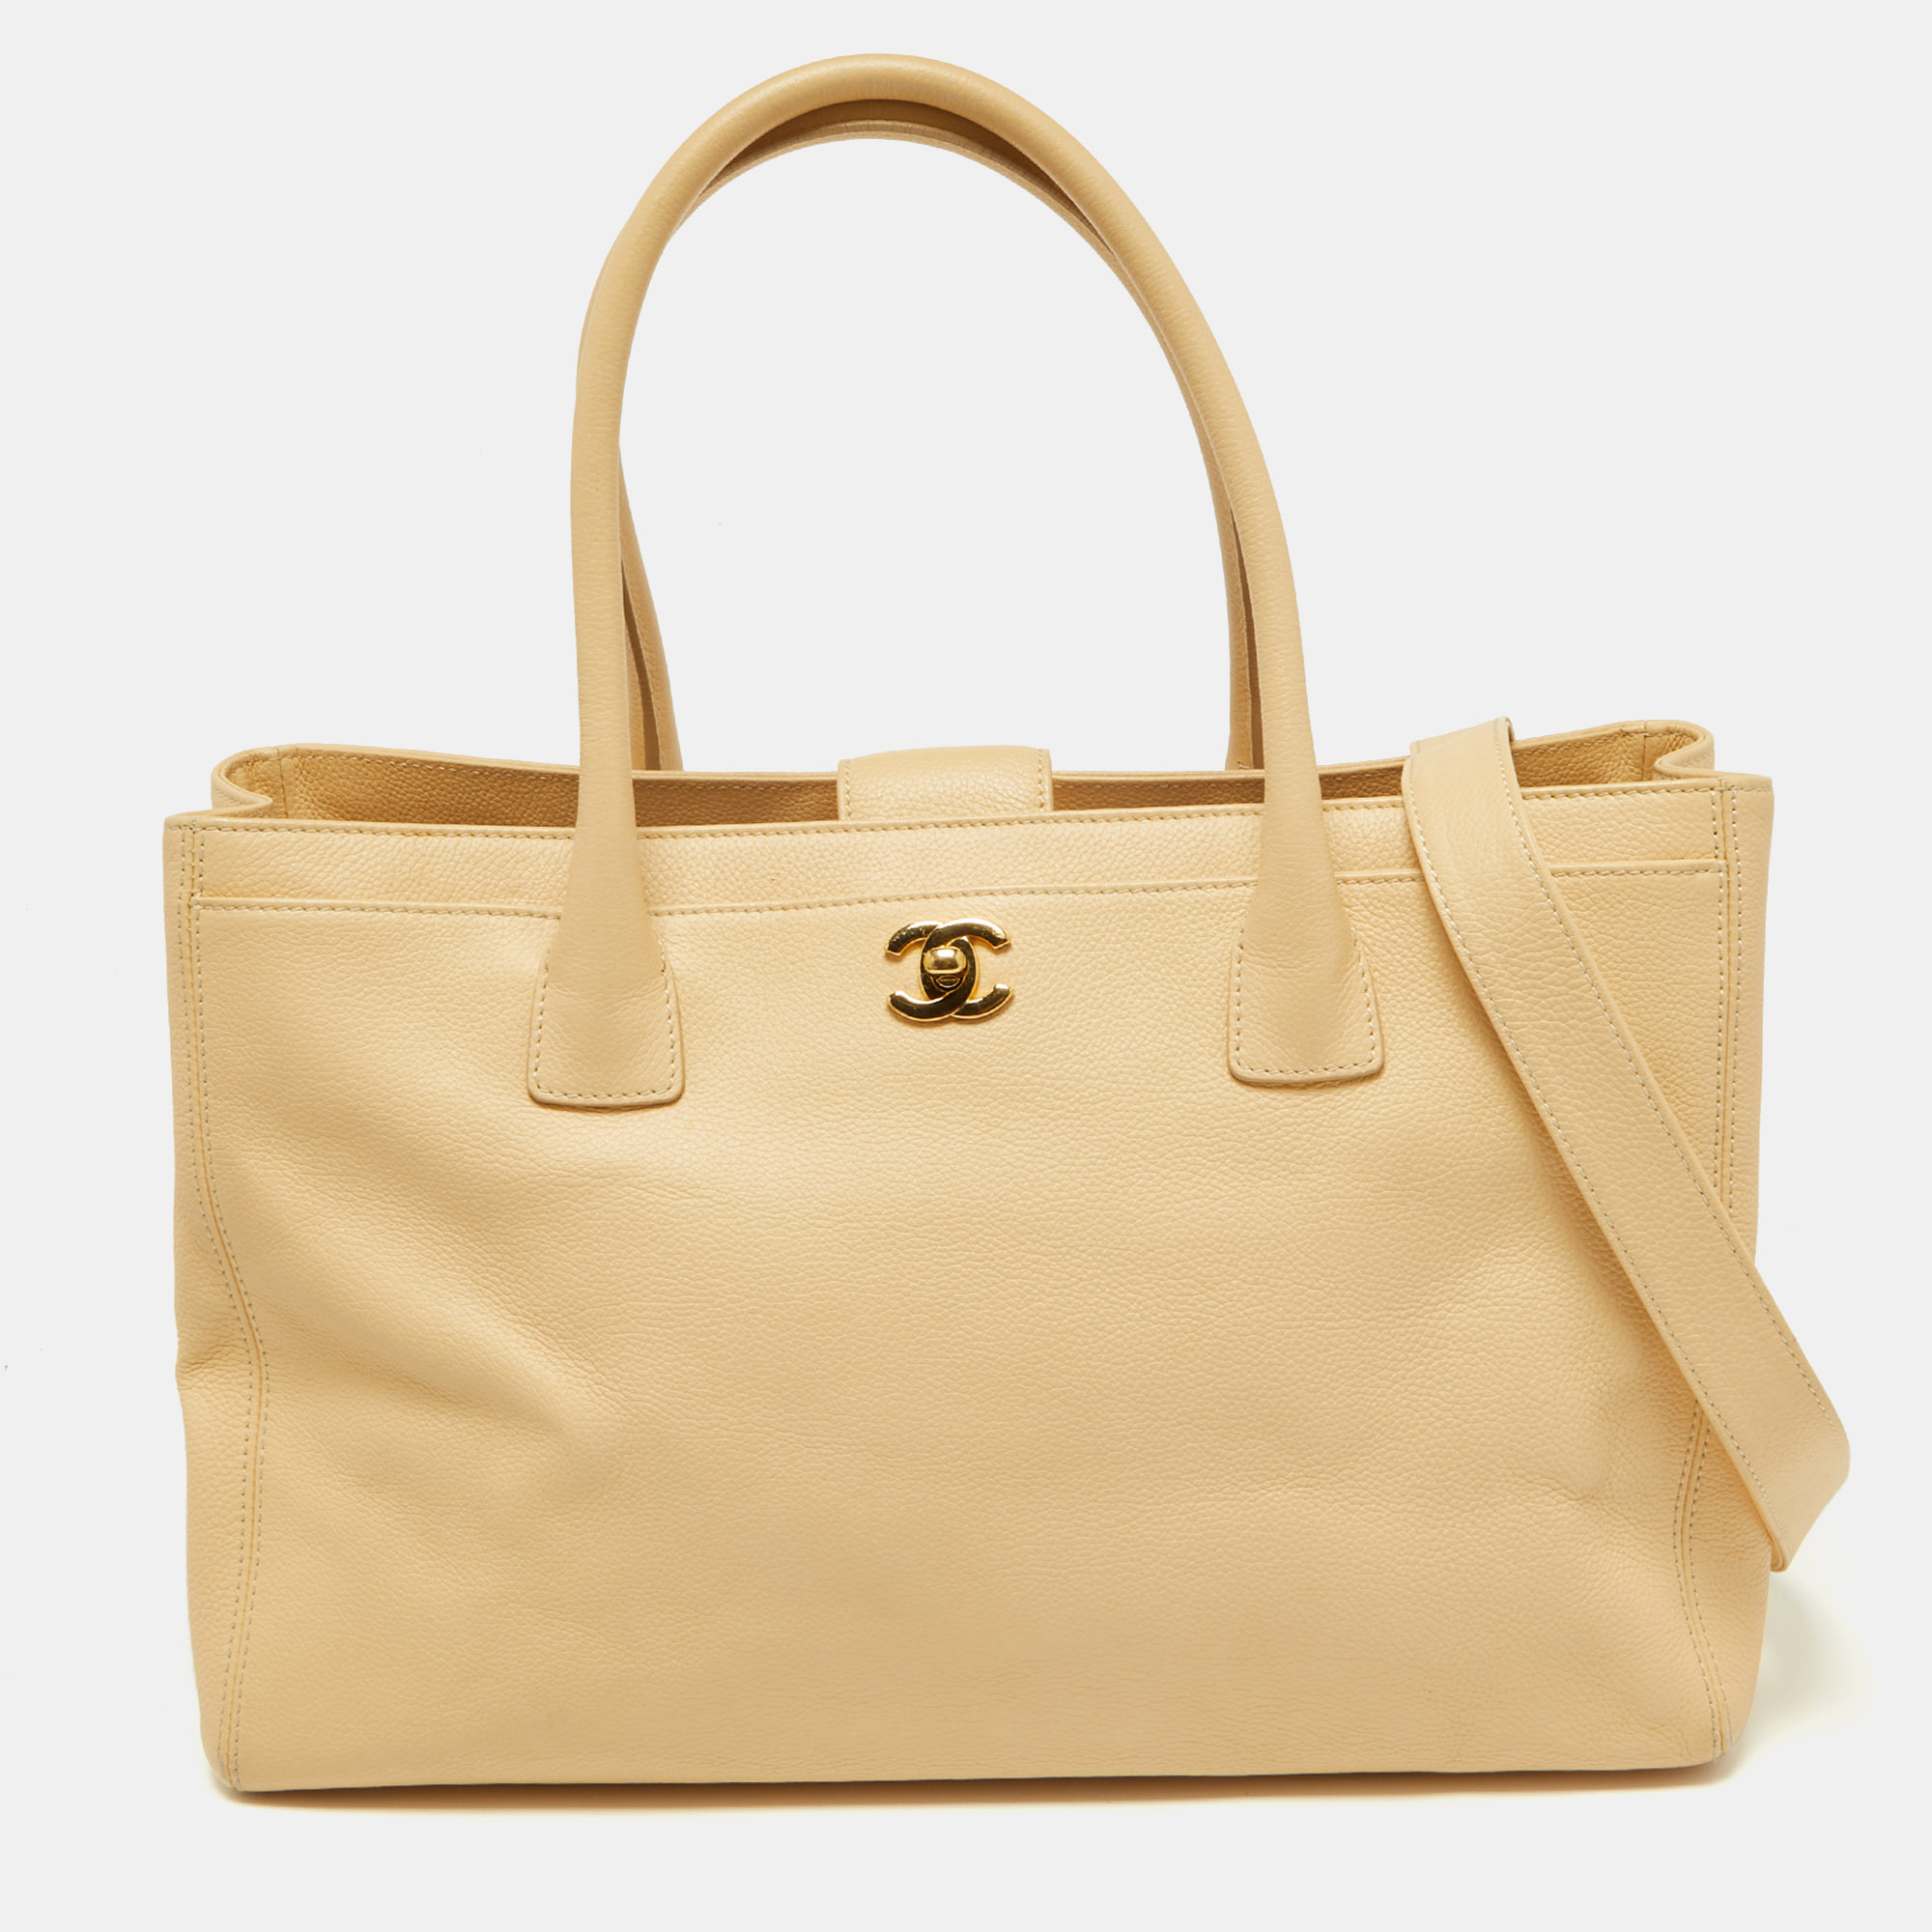 Chanel Beige Leather Cerf Shopper Tote